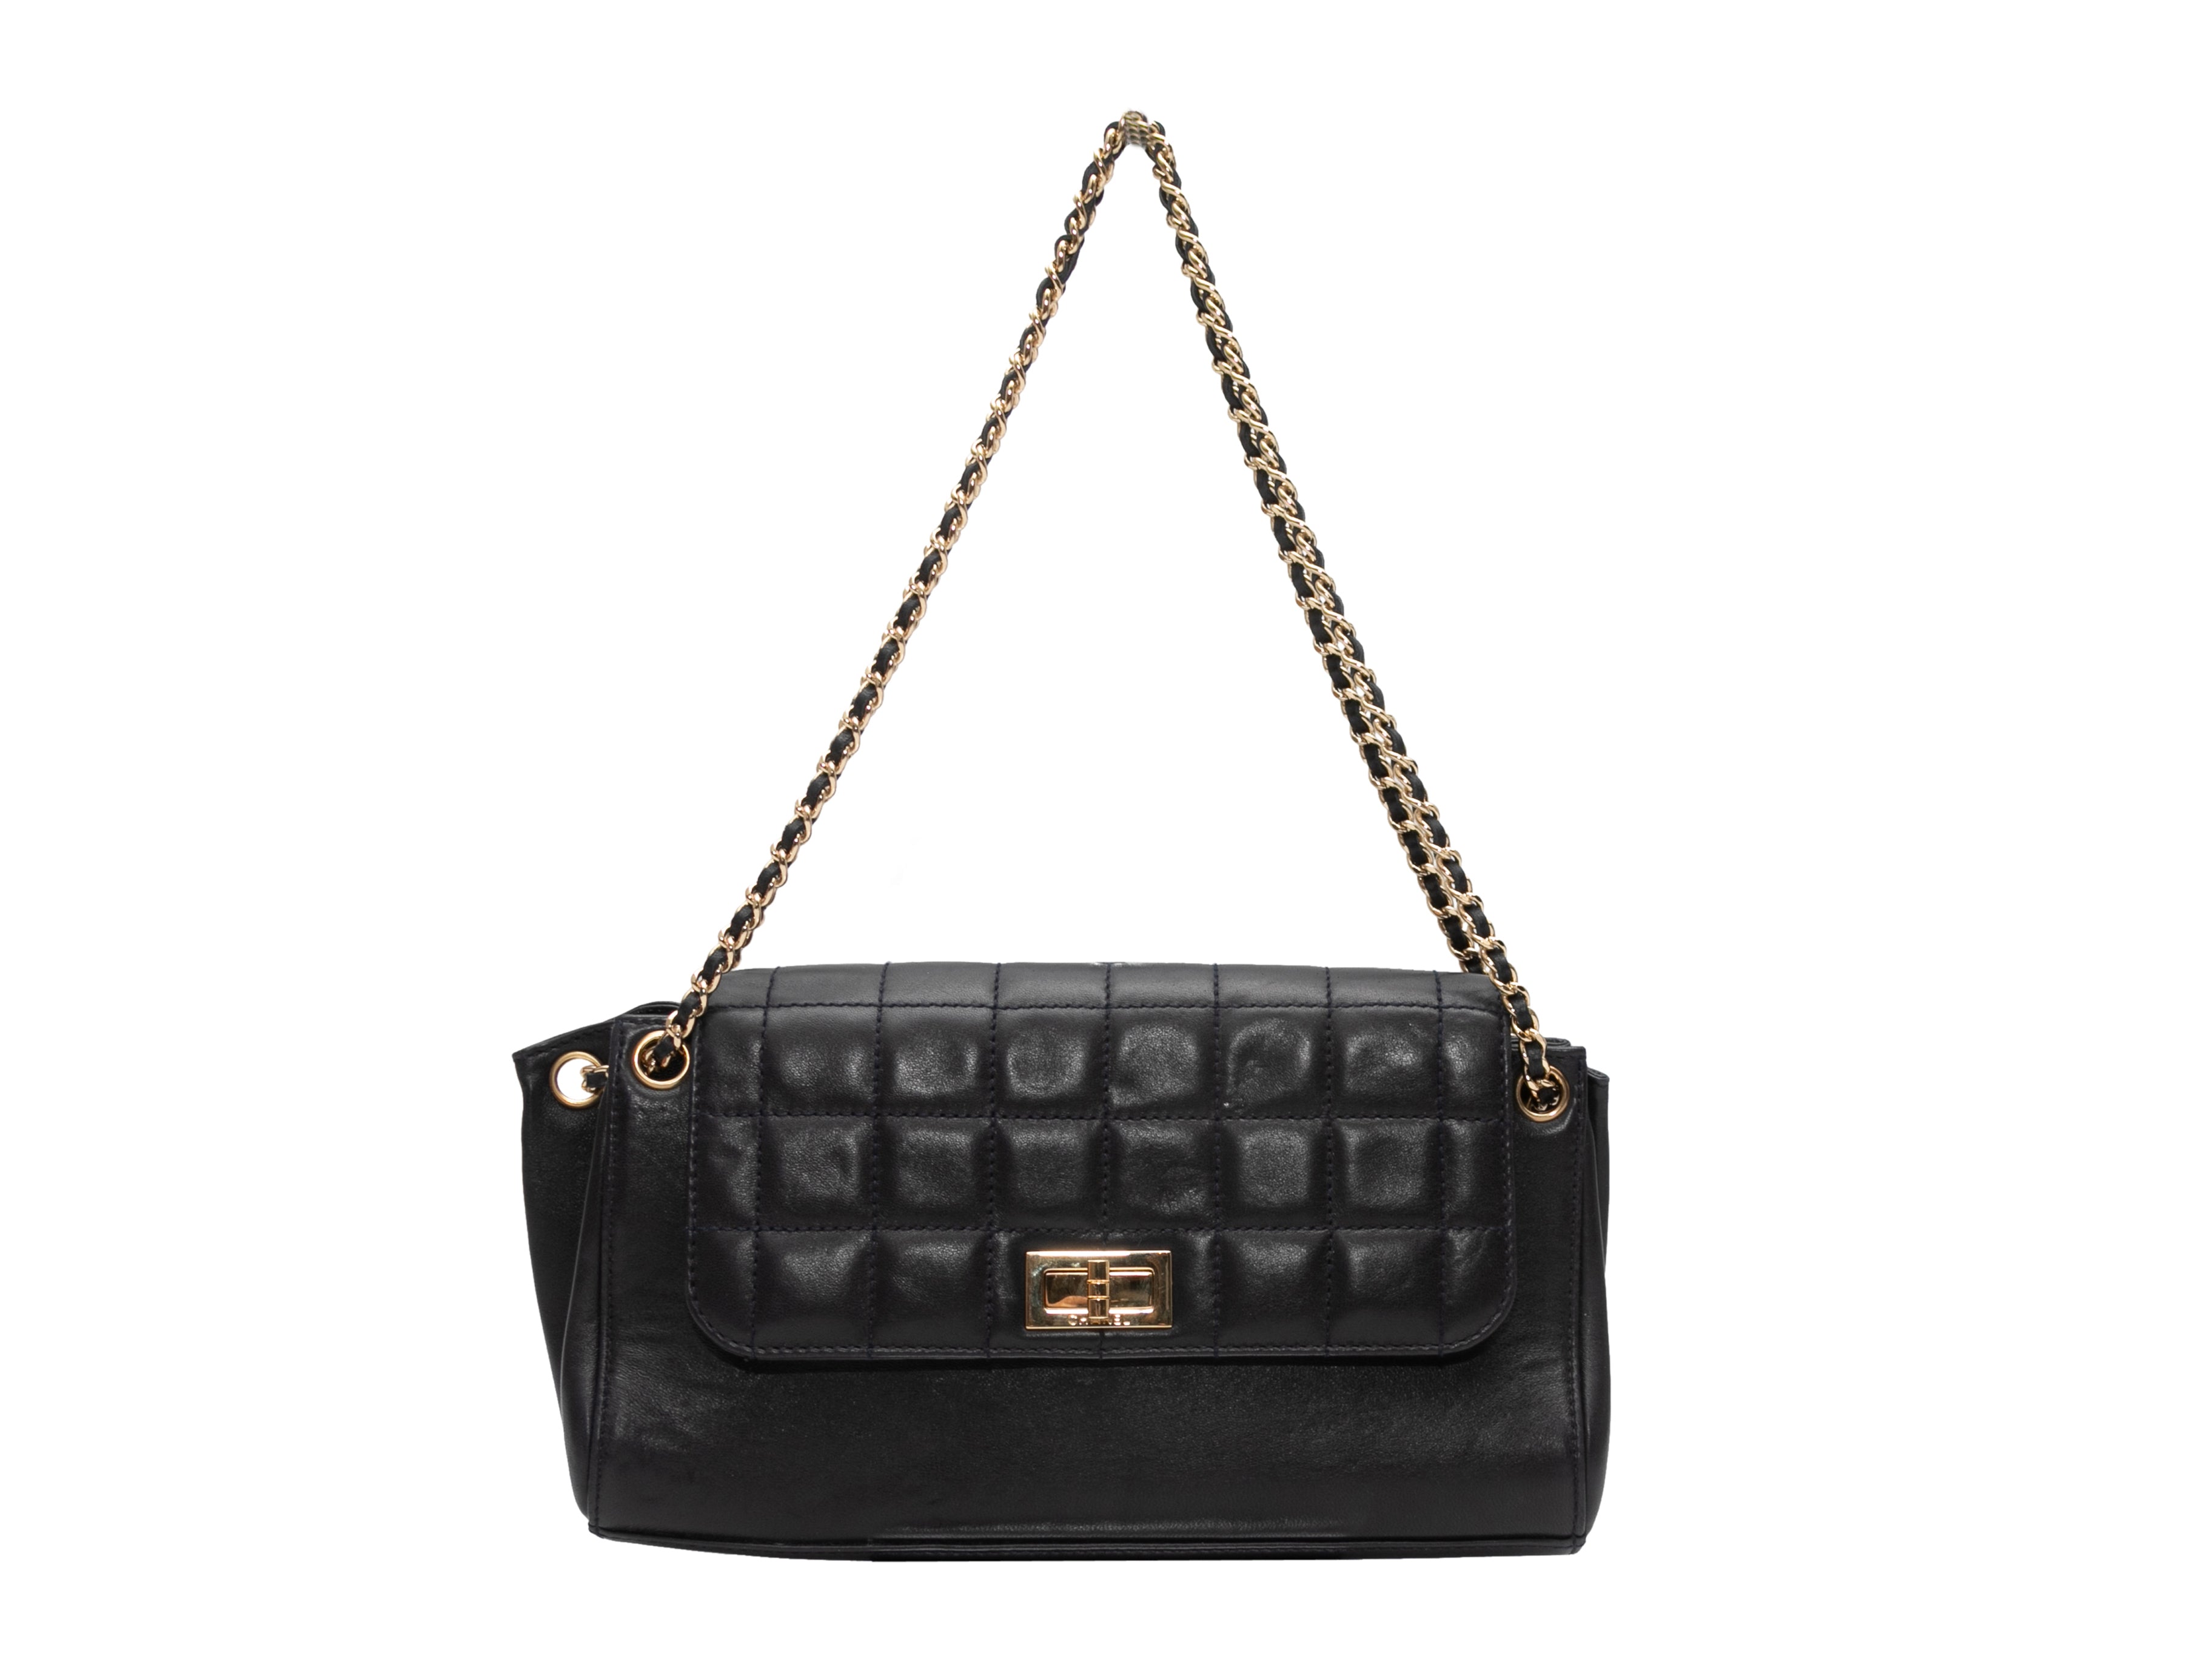 Timeless Chanel East-West Chain Strap Flap Bag in Black Leather